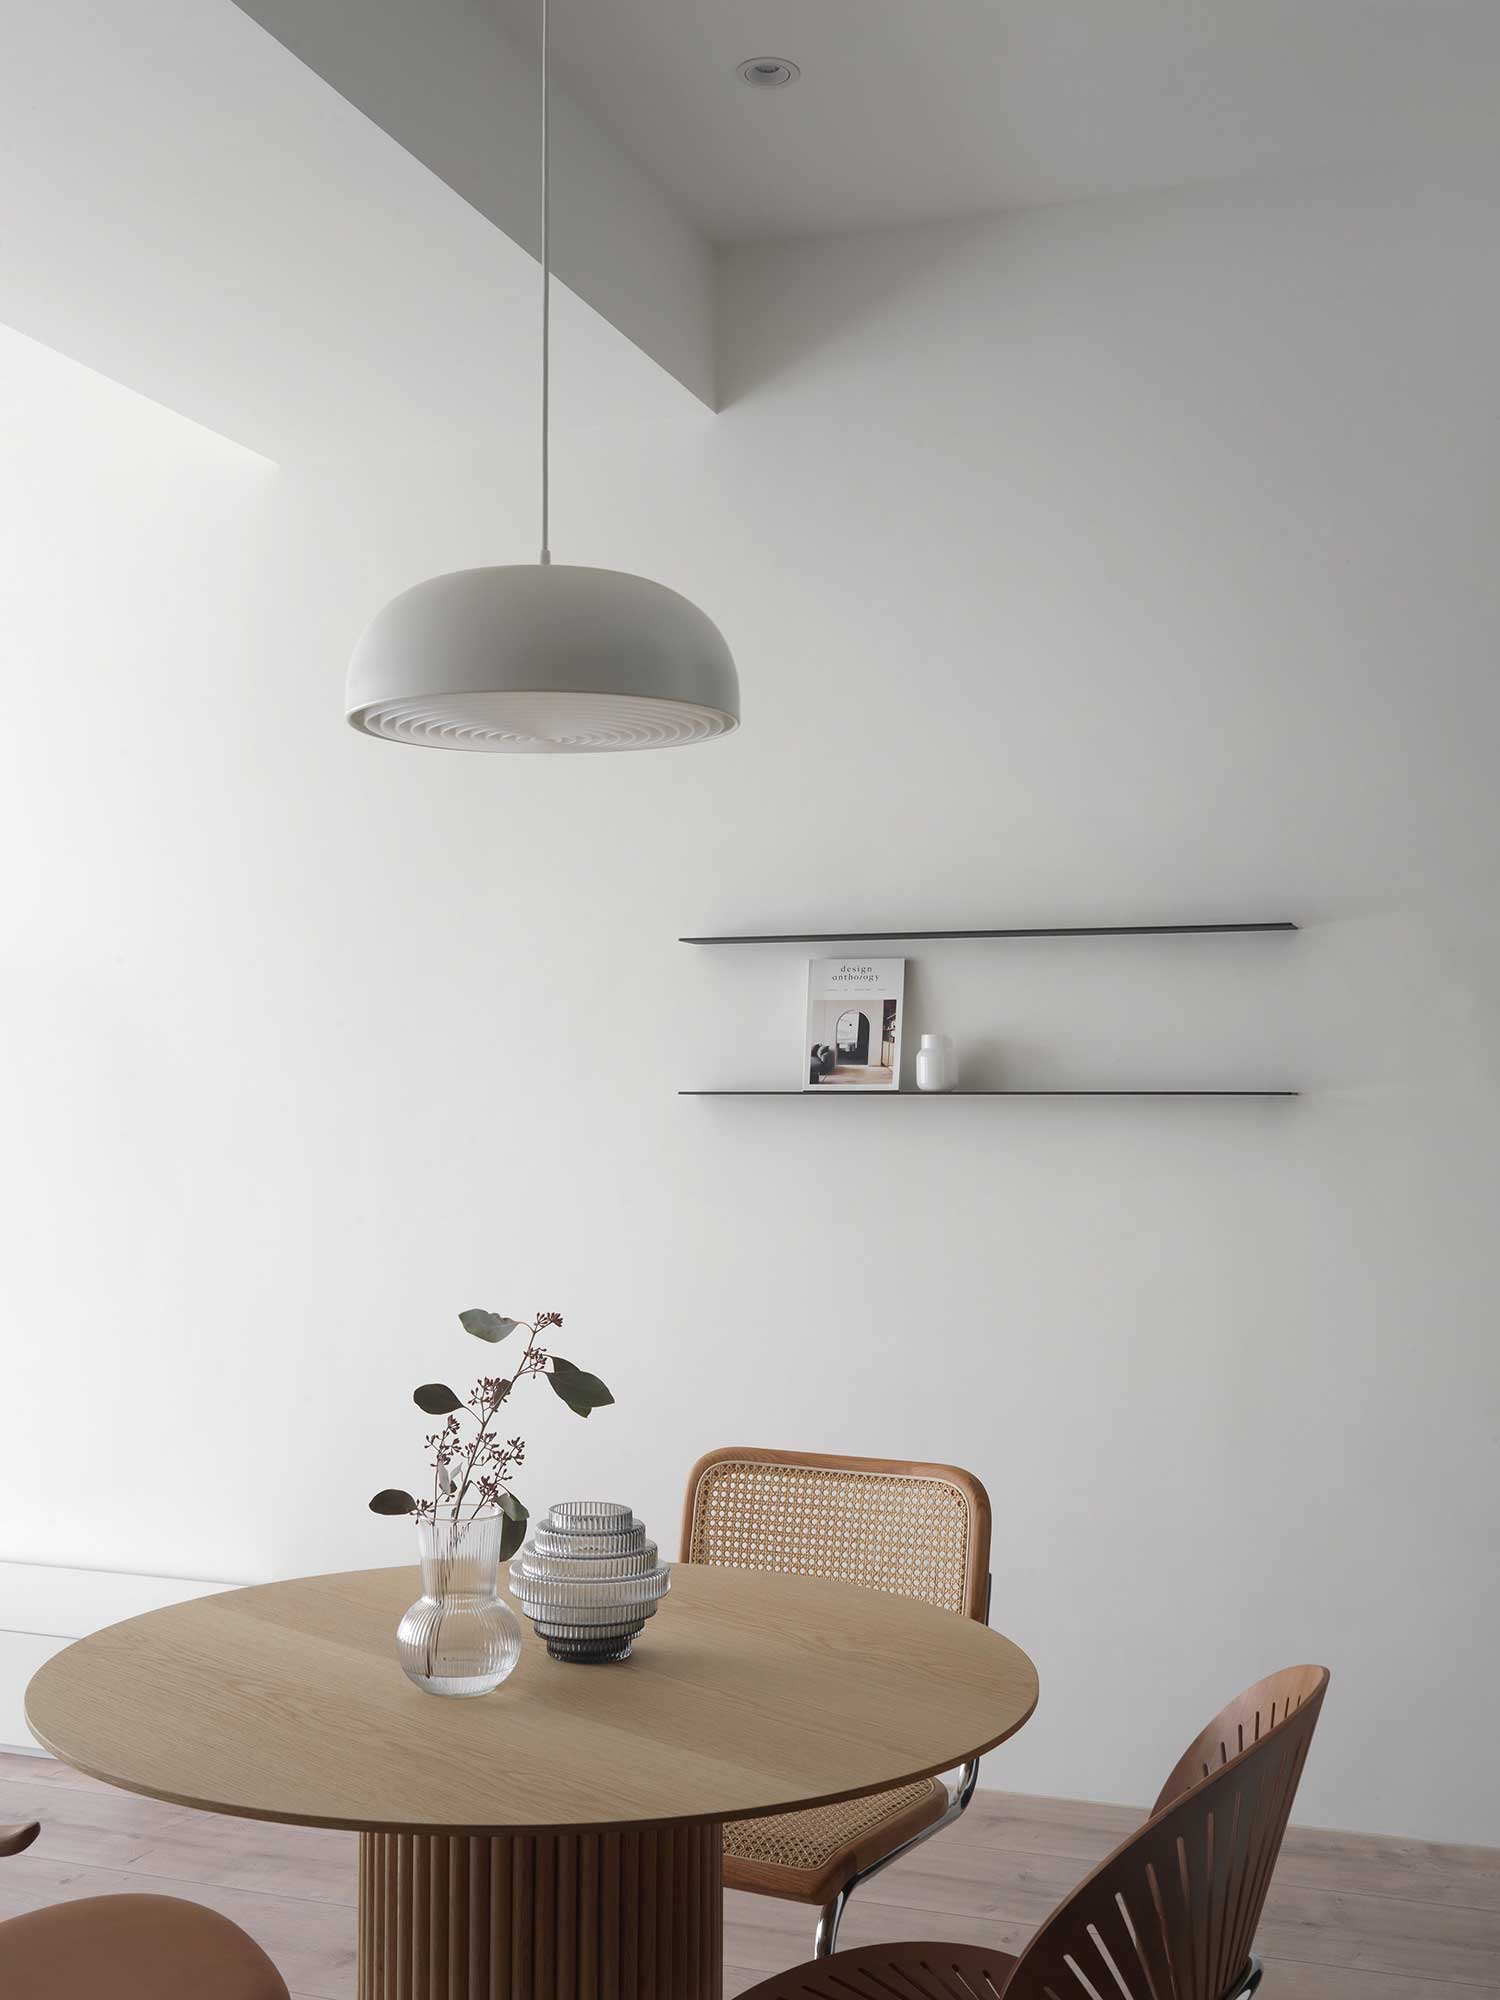 Dining table with chairs and pendant lamp